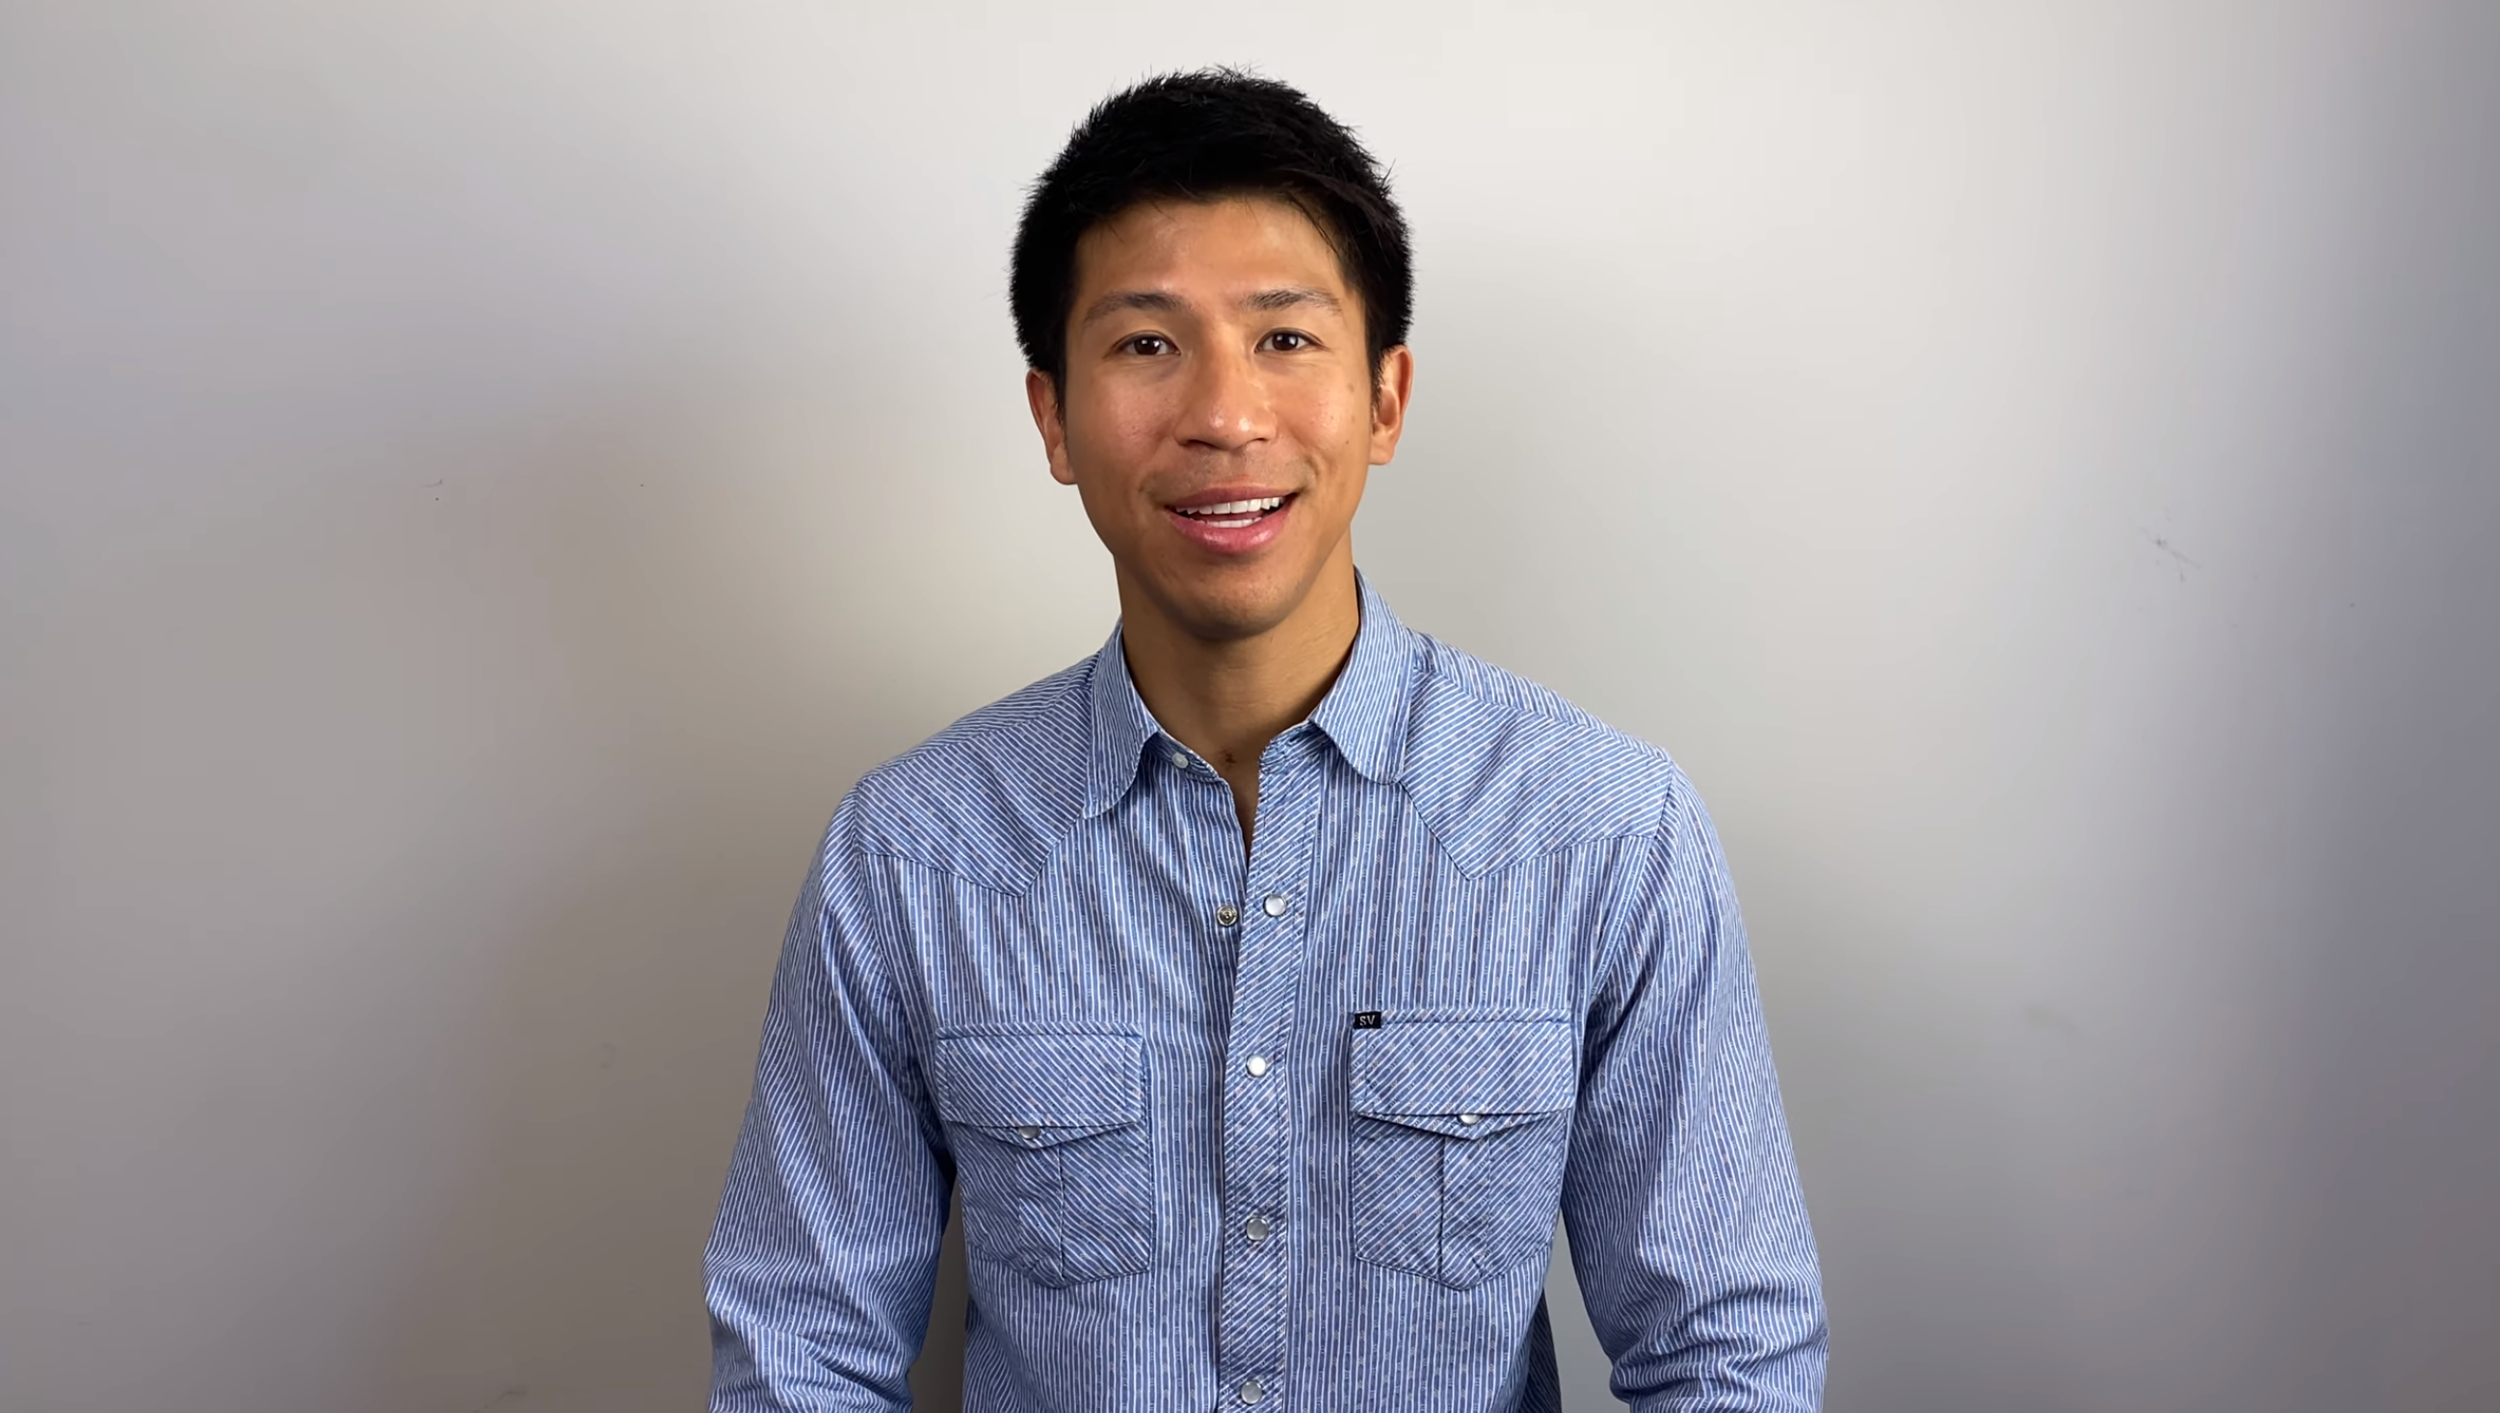 PICTURED: Jeff Chen MD, co-founder of Radicle Science.